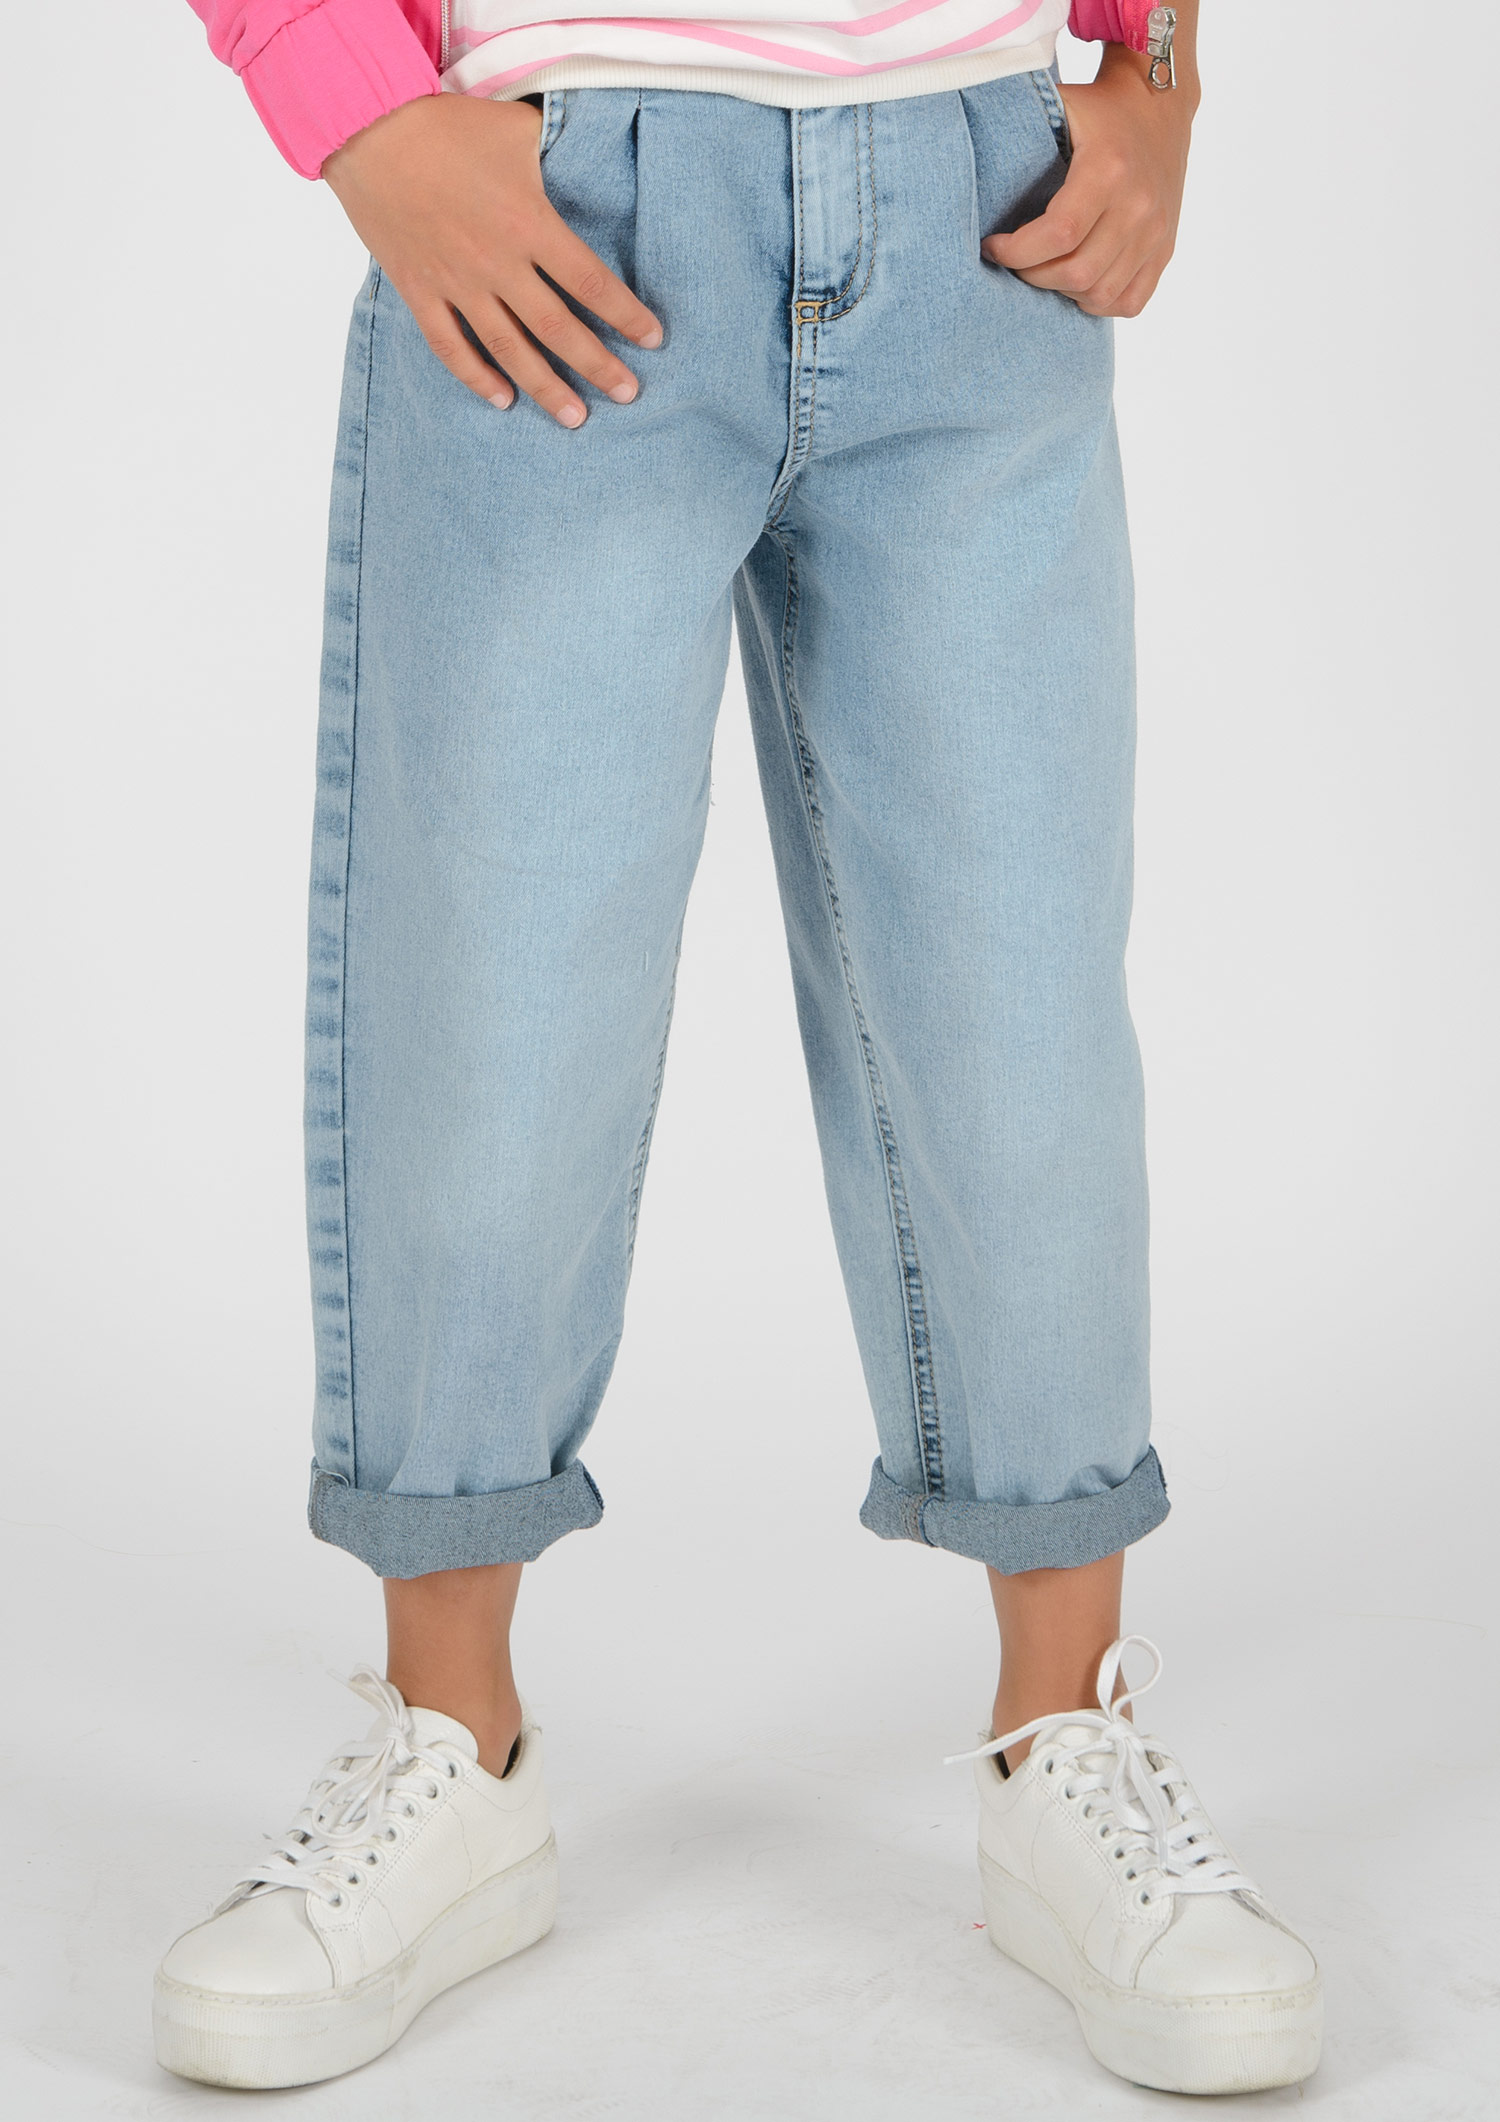 1320-Girls Super Balloon Jeans Cropped, available in Normal